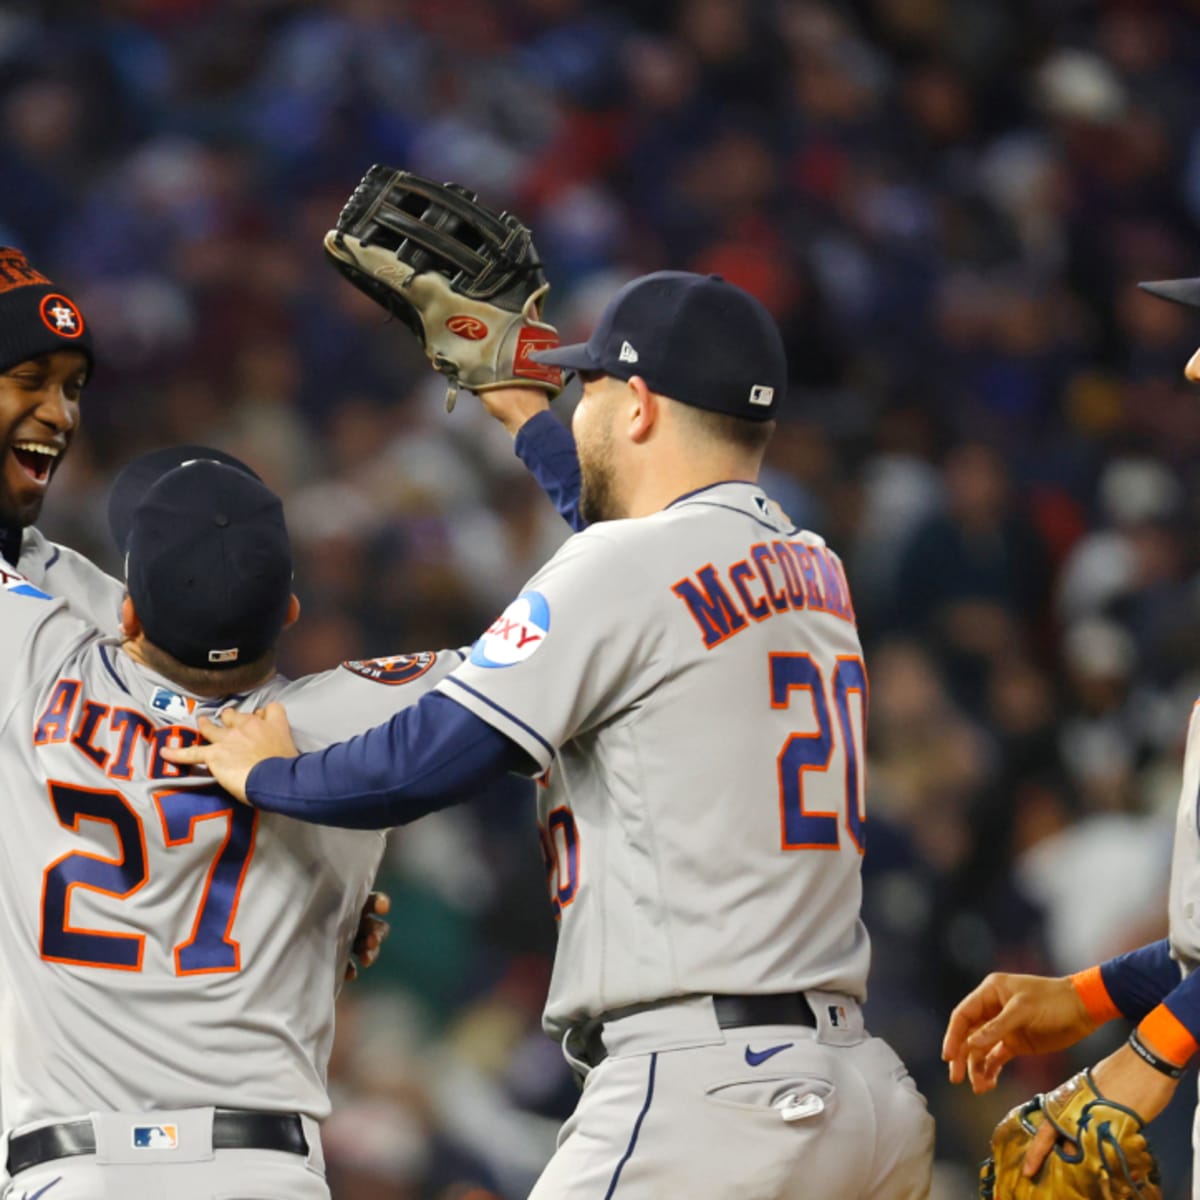 Houston Astros - Our ALCS roster is set.